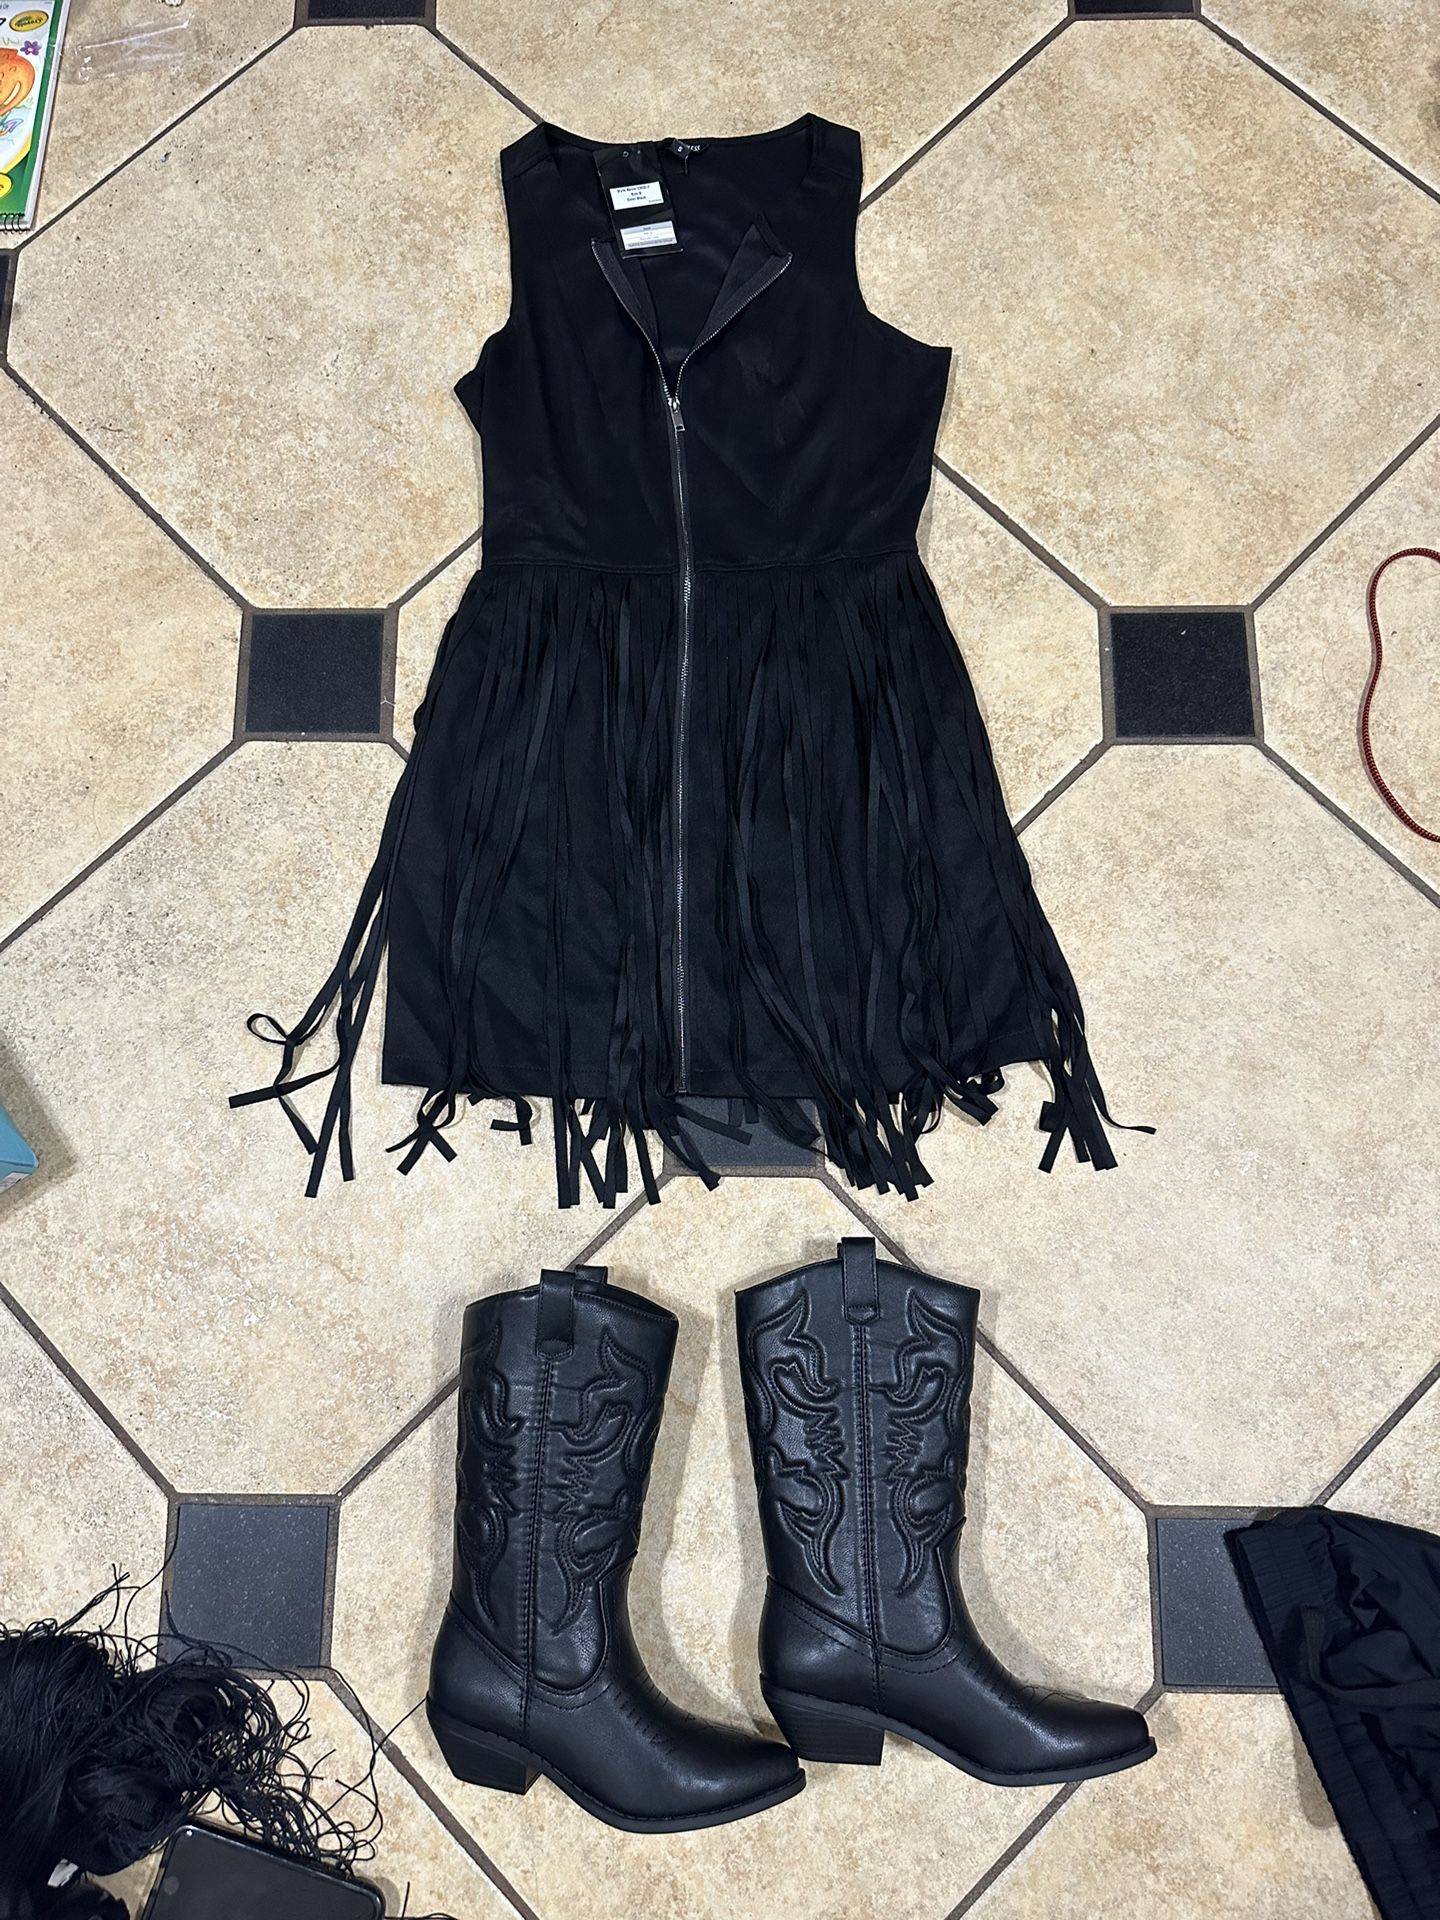 BRAND NEW SIZE SMALL FRINGE DRESSES AND Size 5.5 Women’s Western Rodeo Wear!!! $45 And $40 Dollars 